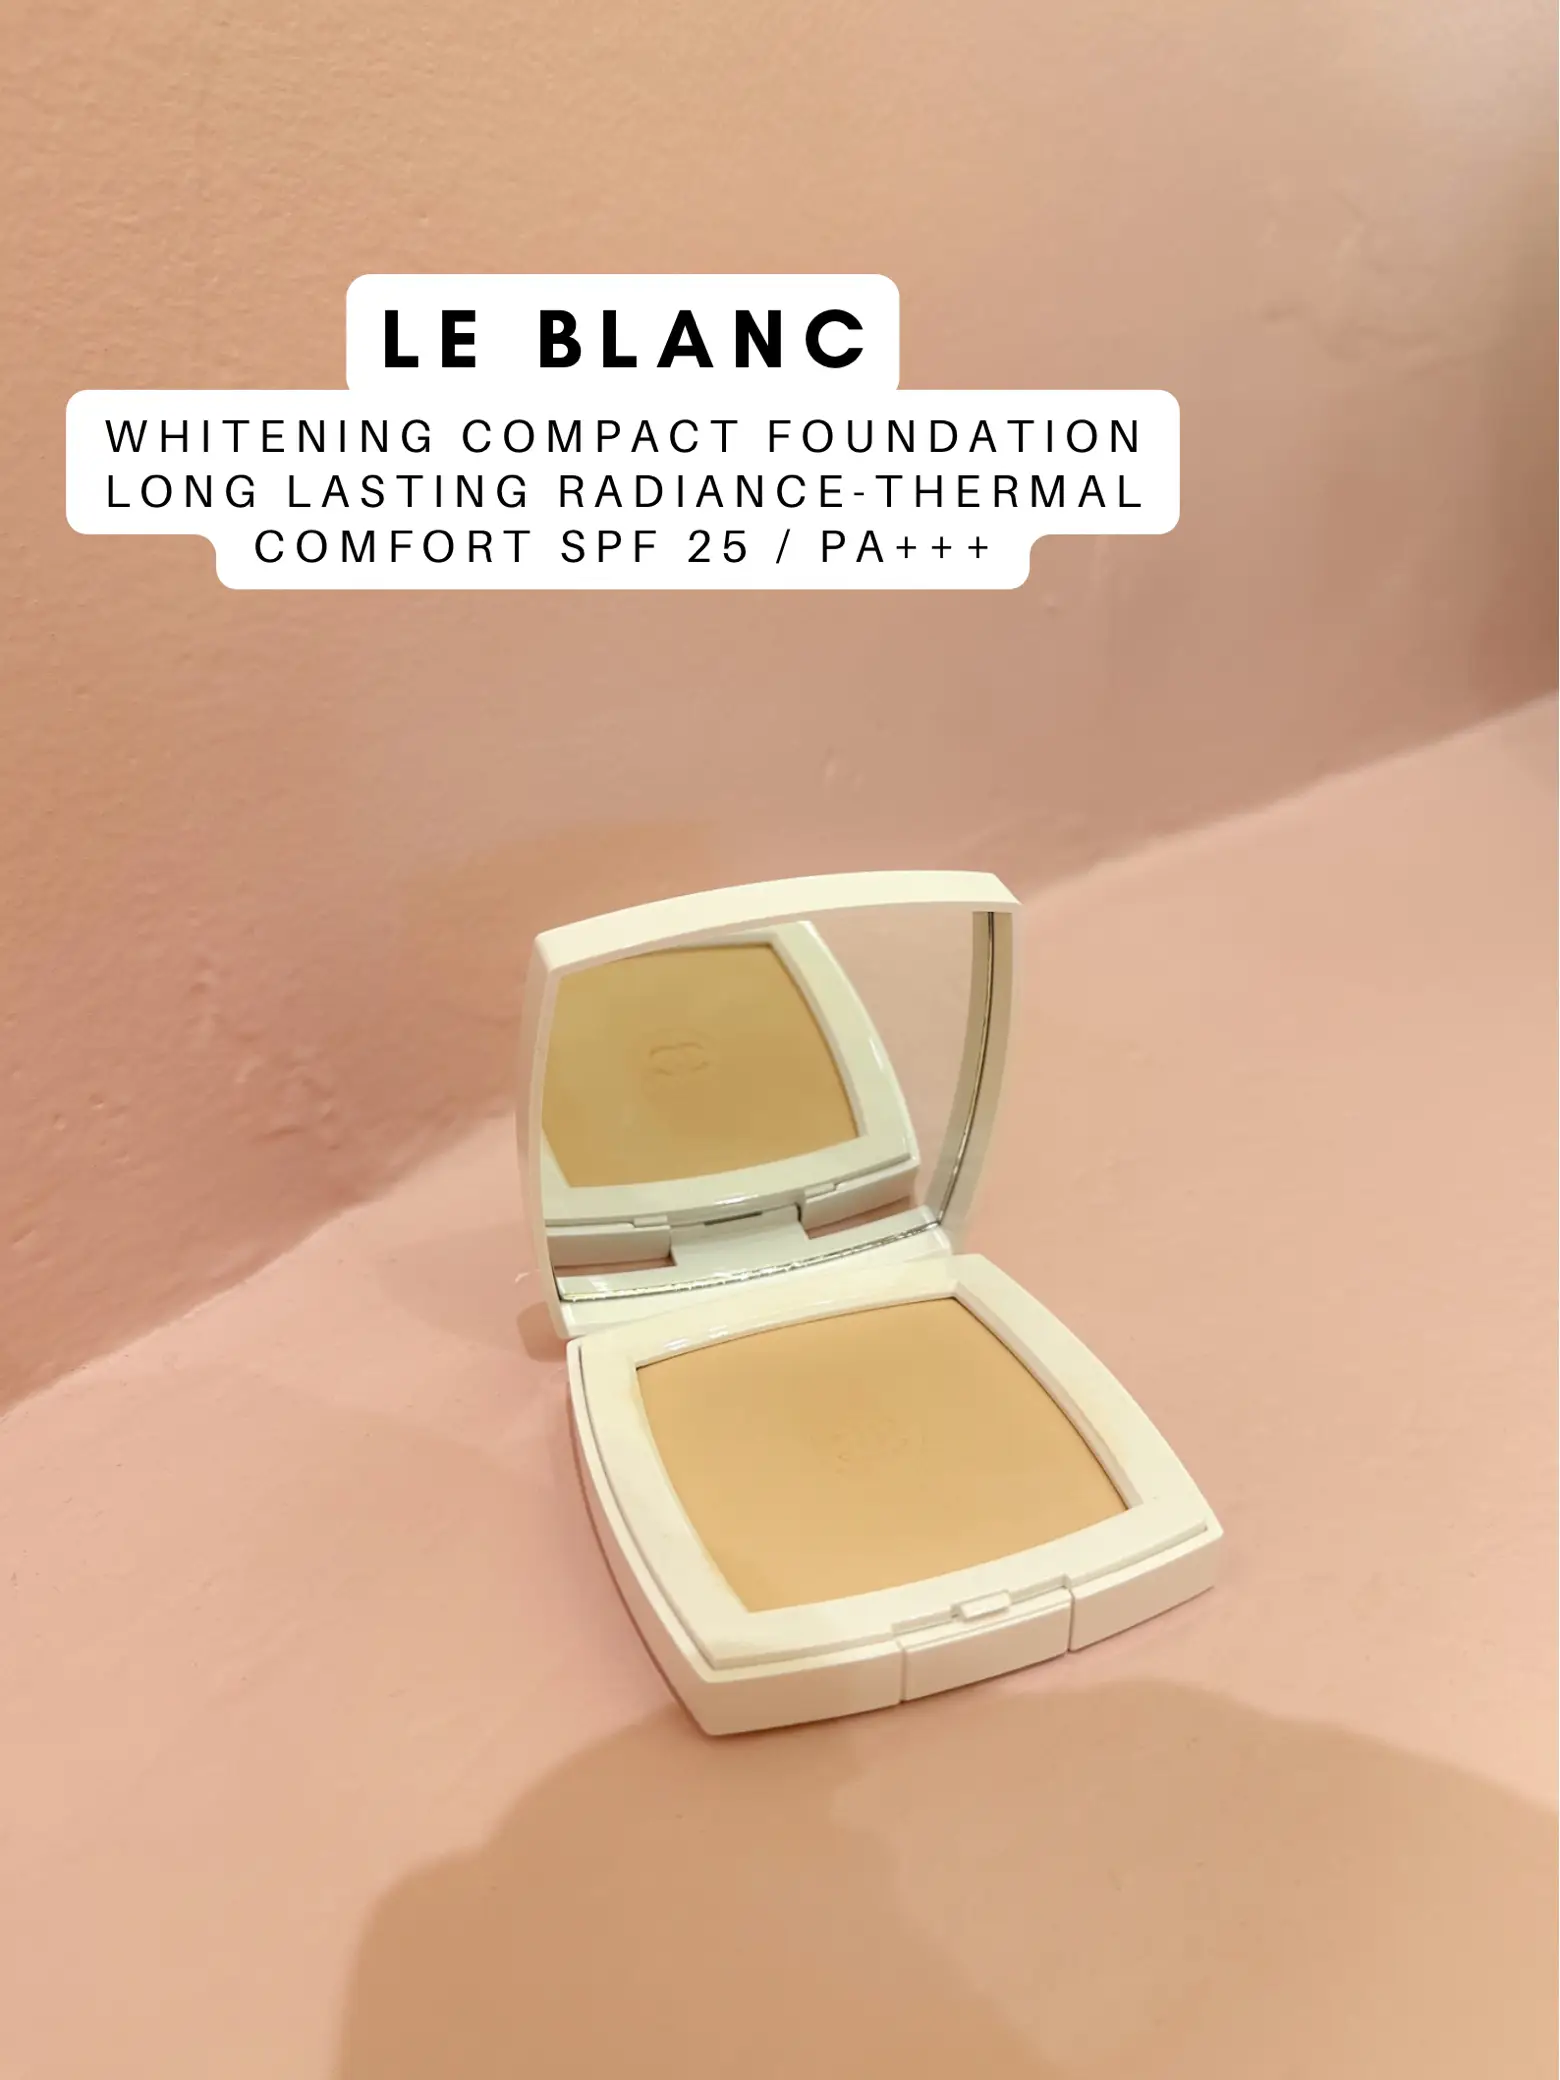 favorite compact foundation Archives - Reviews and Other Stuff